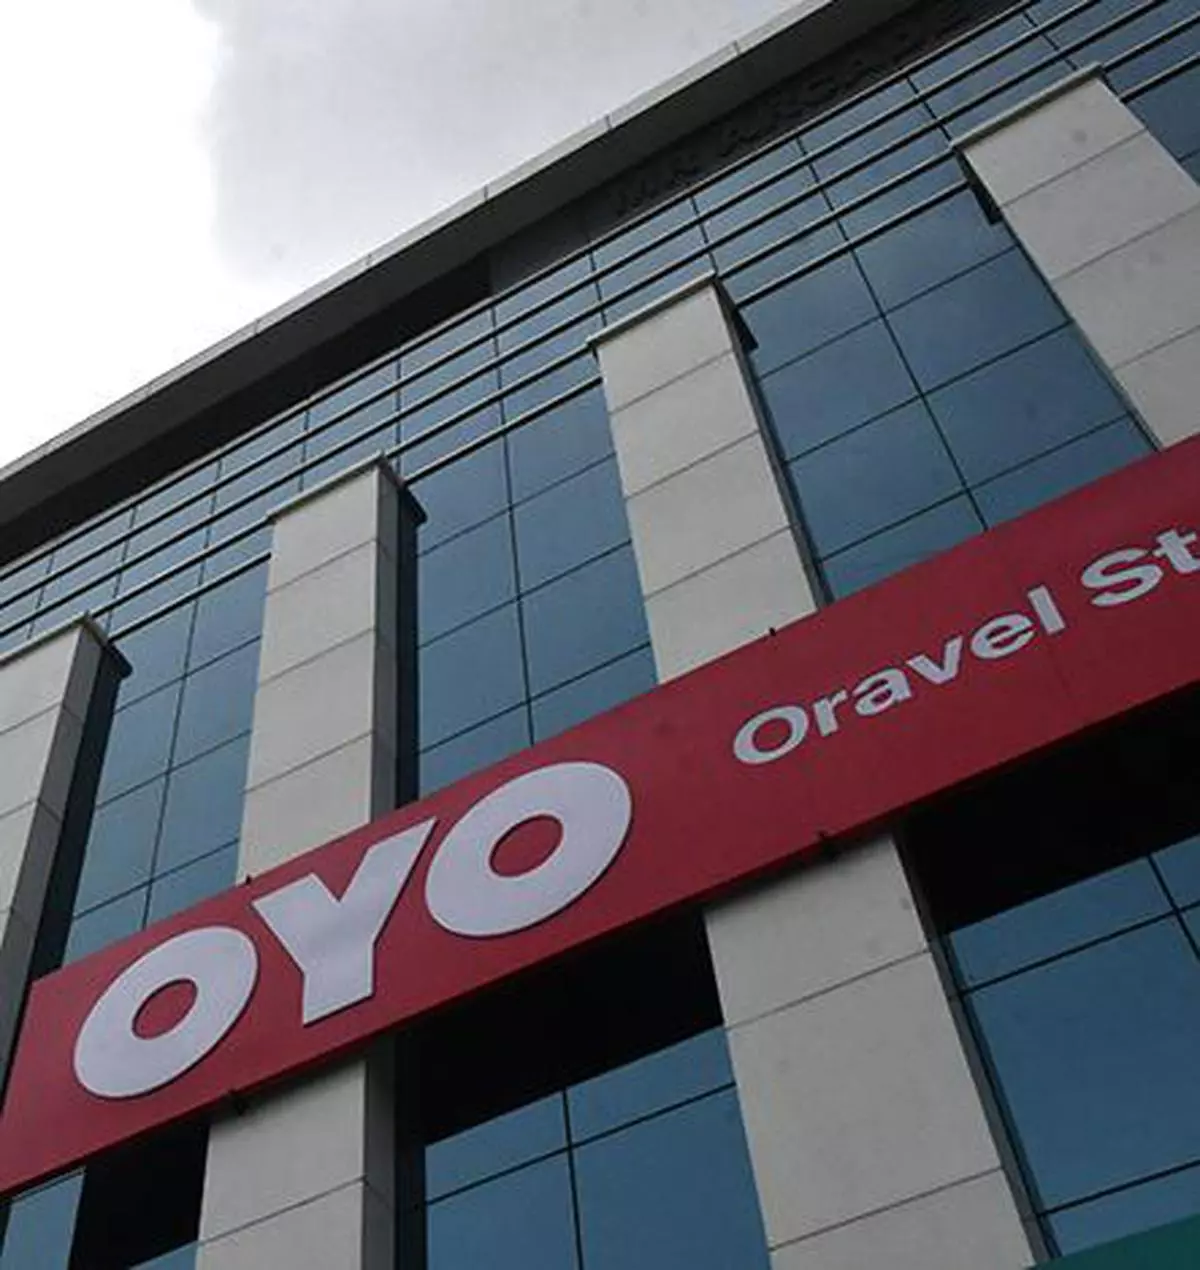 Oyo seeks to resurrect IPO after growth resumes - The Hindu BusinessLine